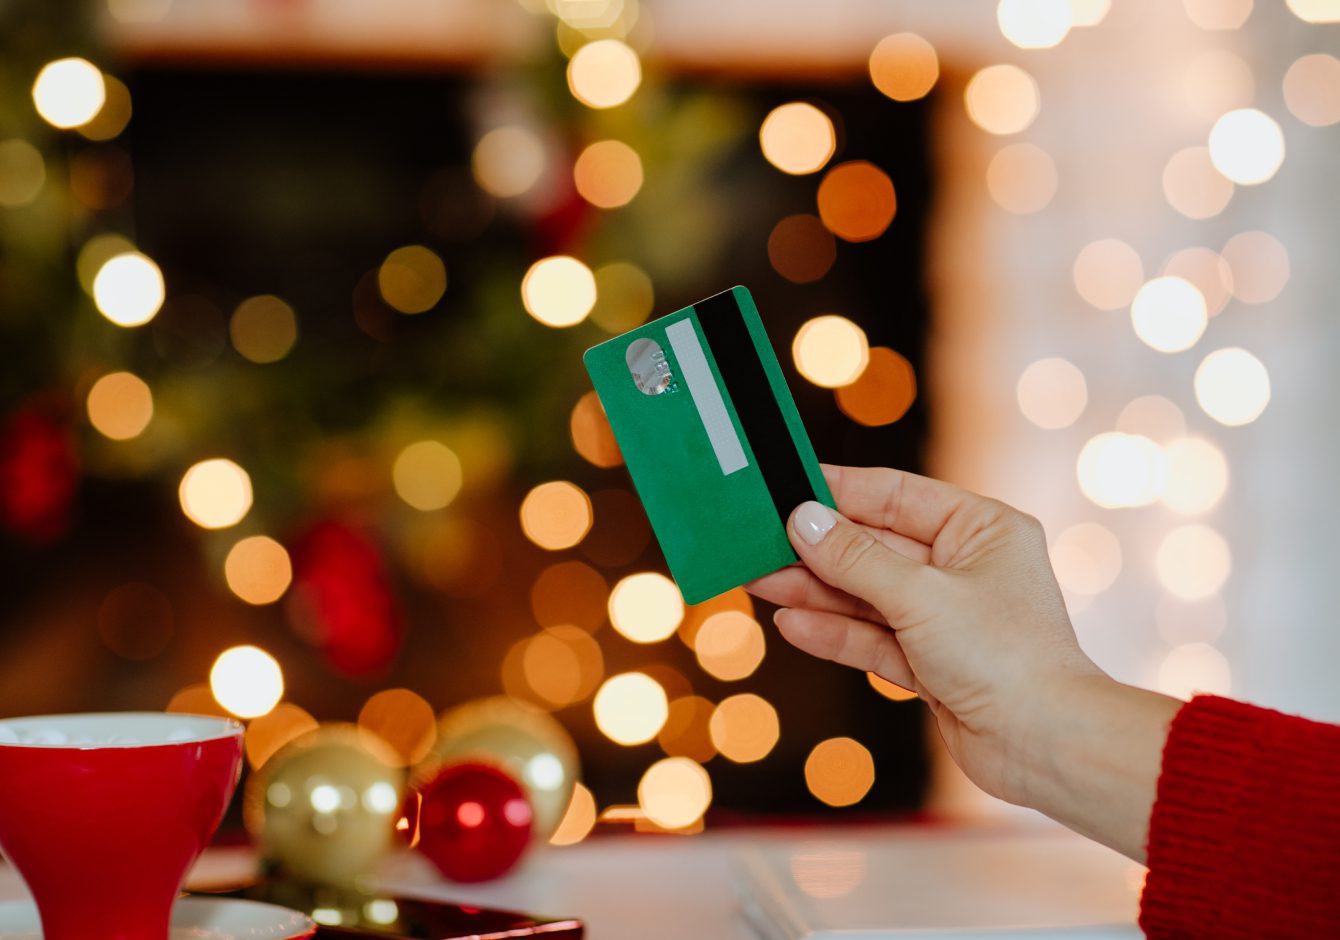 Woman's hand holding green credit card against glowing Christmas lights in the background